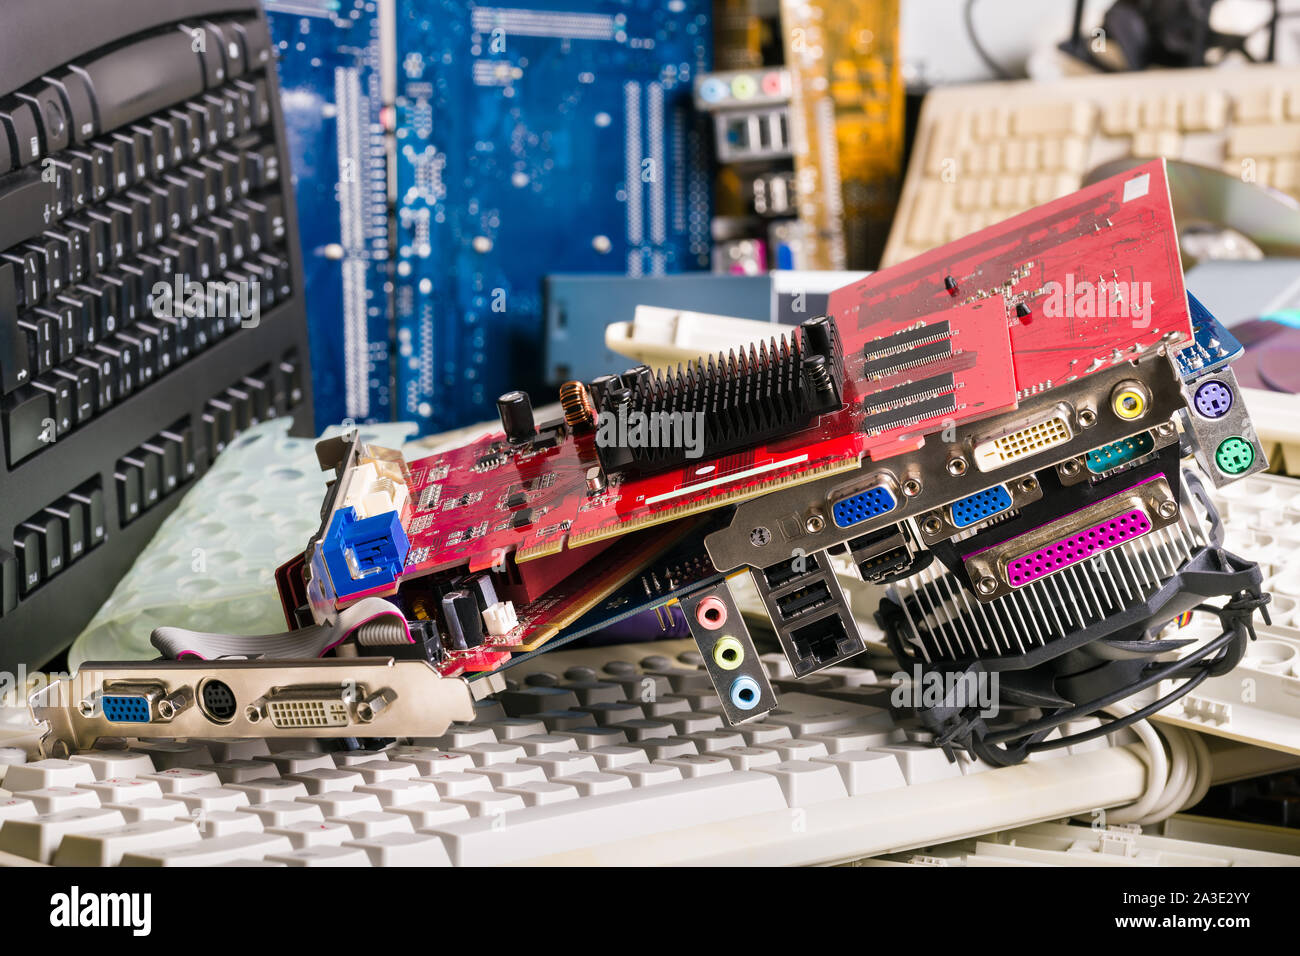 E-waste dump pile. Discarded computer parts. Waste sorting and disposal of  electronic components. Plastic keyboards, cards, circuit boards, heatsinks  Stock Photo - Alamy